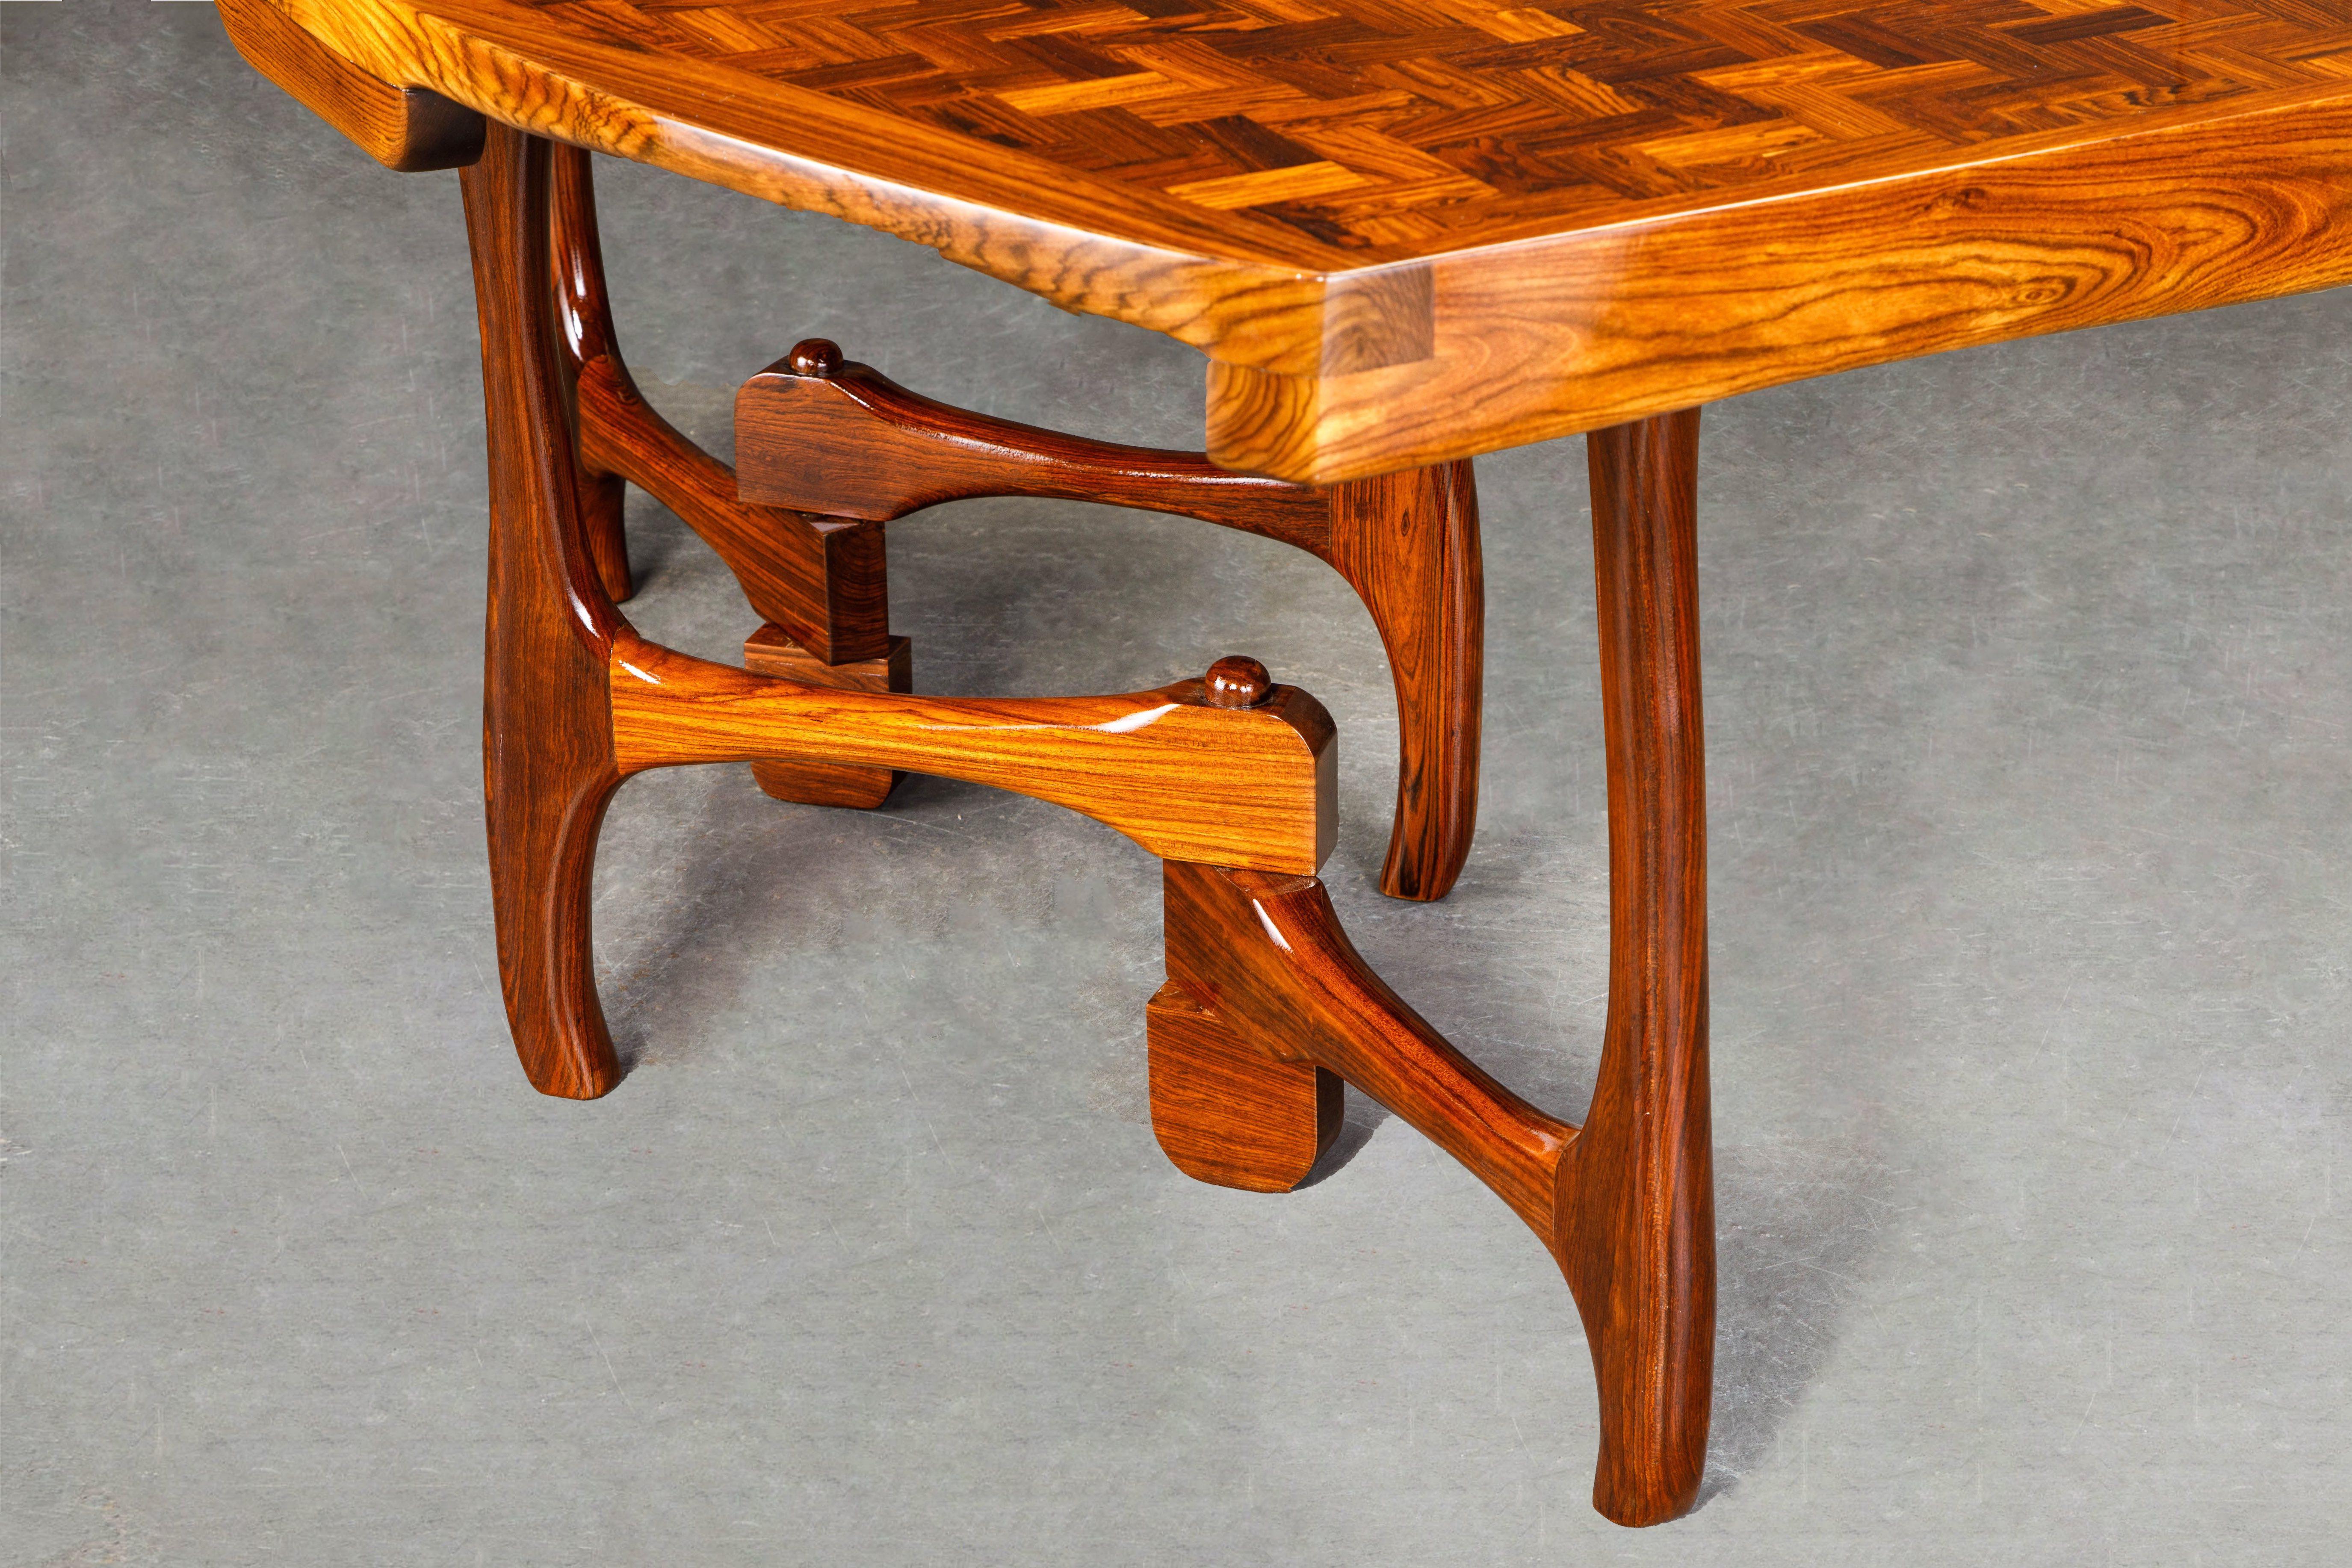 Rare Exotic Cocobolo Rosewood Dining Table by Don Shoemaker for Senal, Signed 2